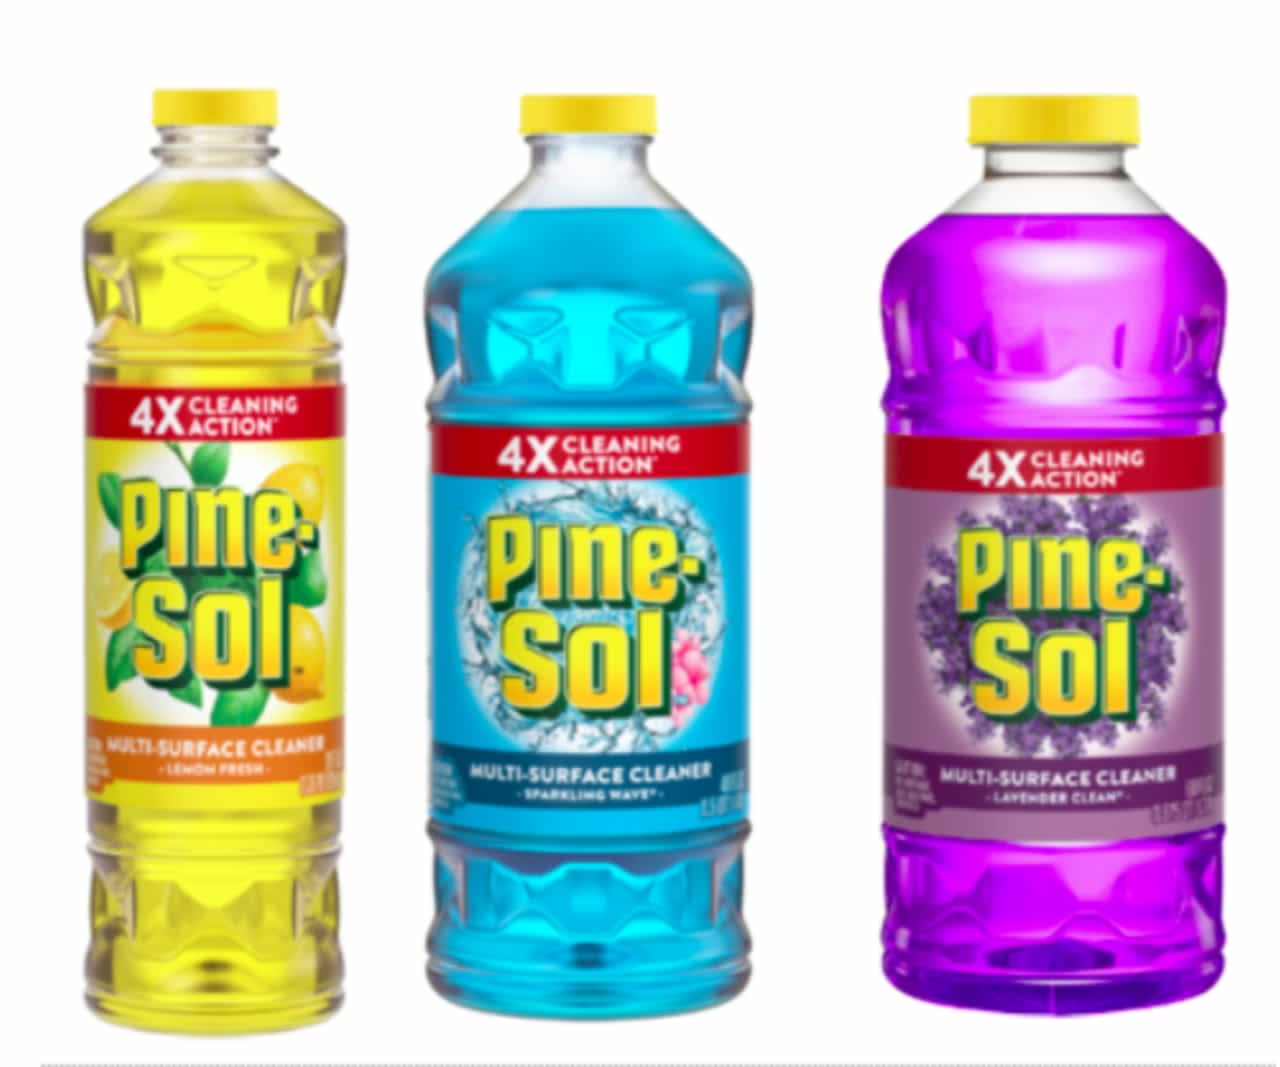 Parent company Clorox is recalling eight Pine-Sol disinfectant cleaning products due to fears they may contain infection-causing bacteria, the Consumer Product Safety Commission (CPSC) announced.